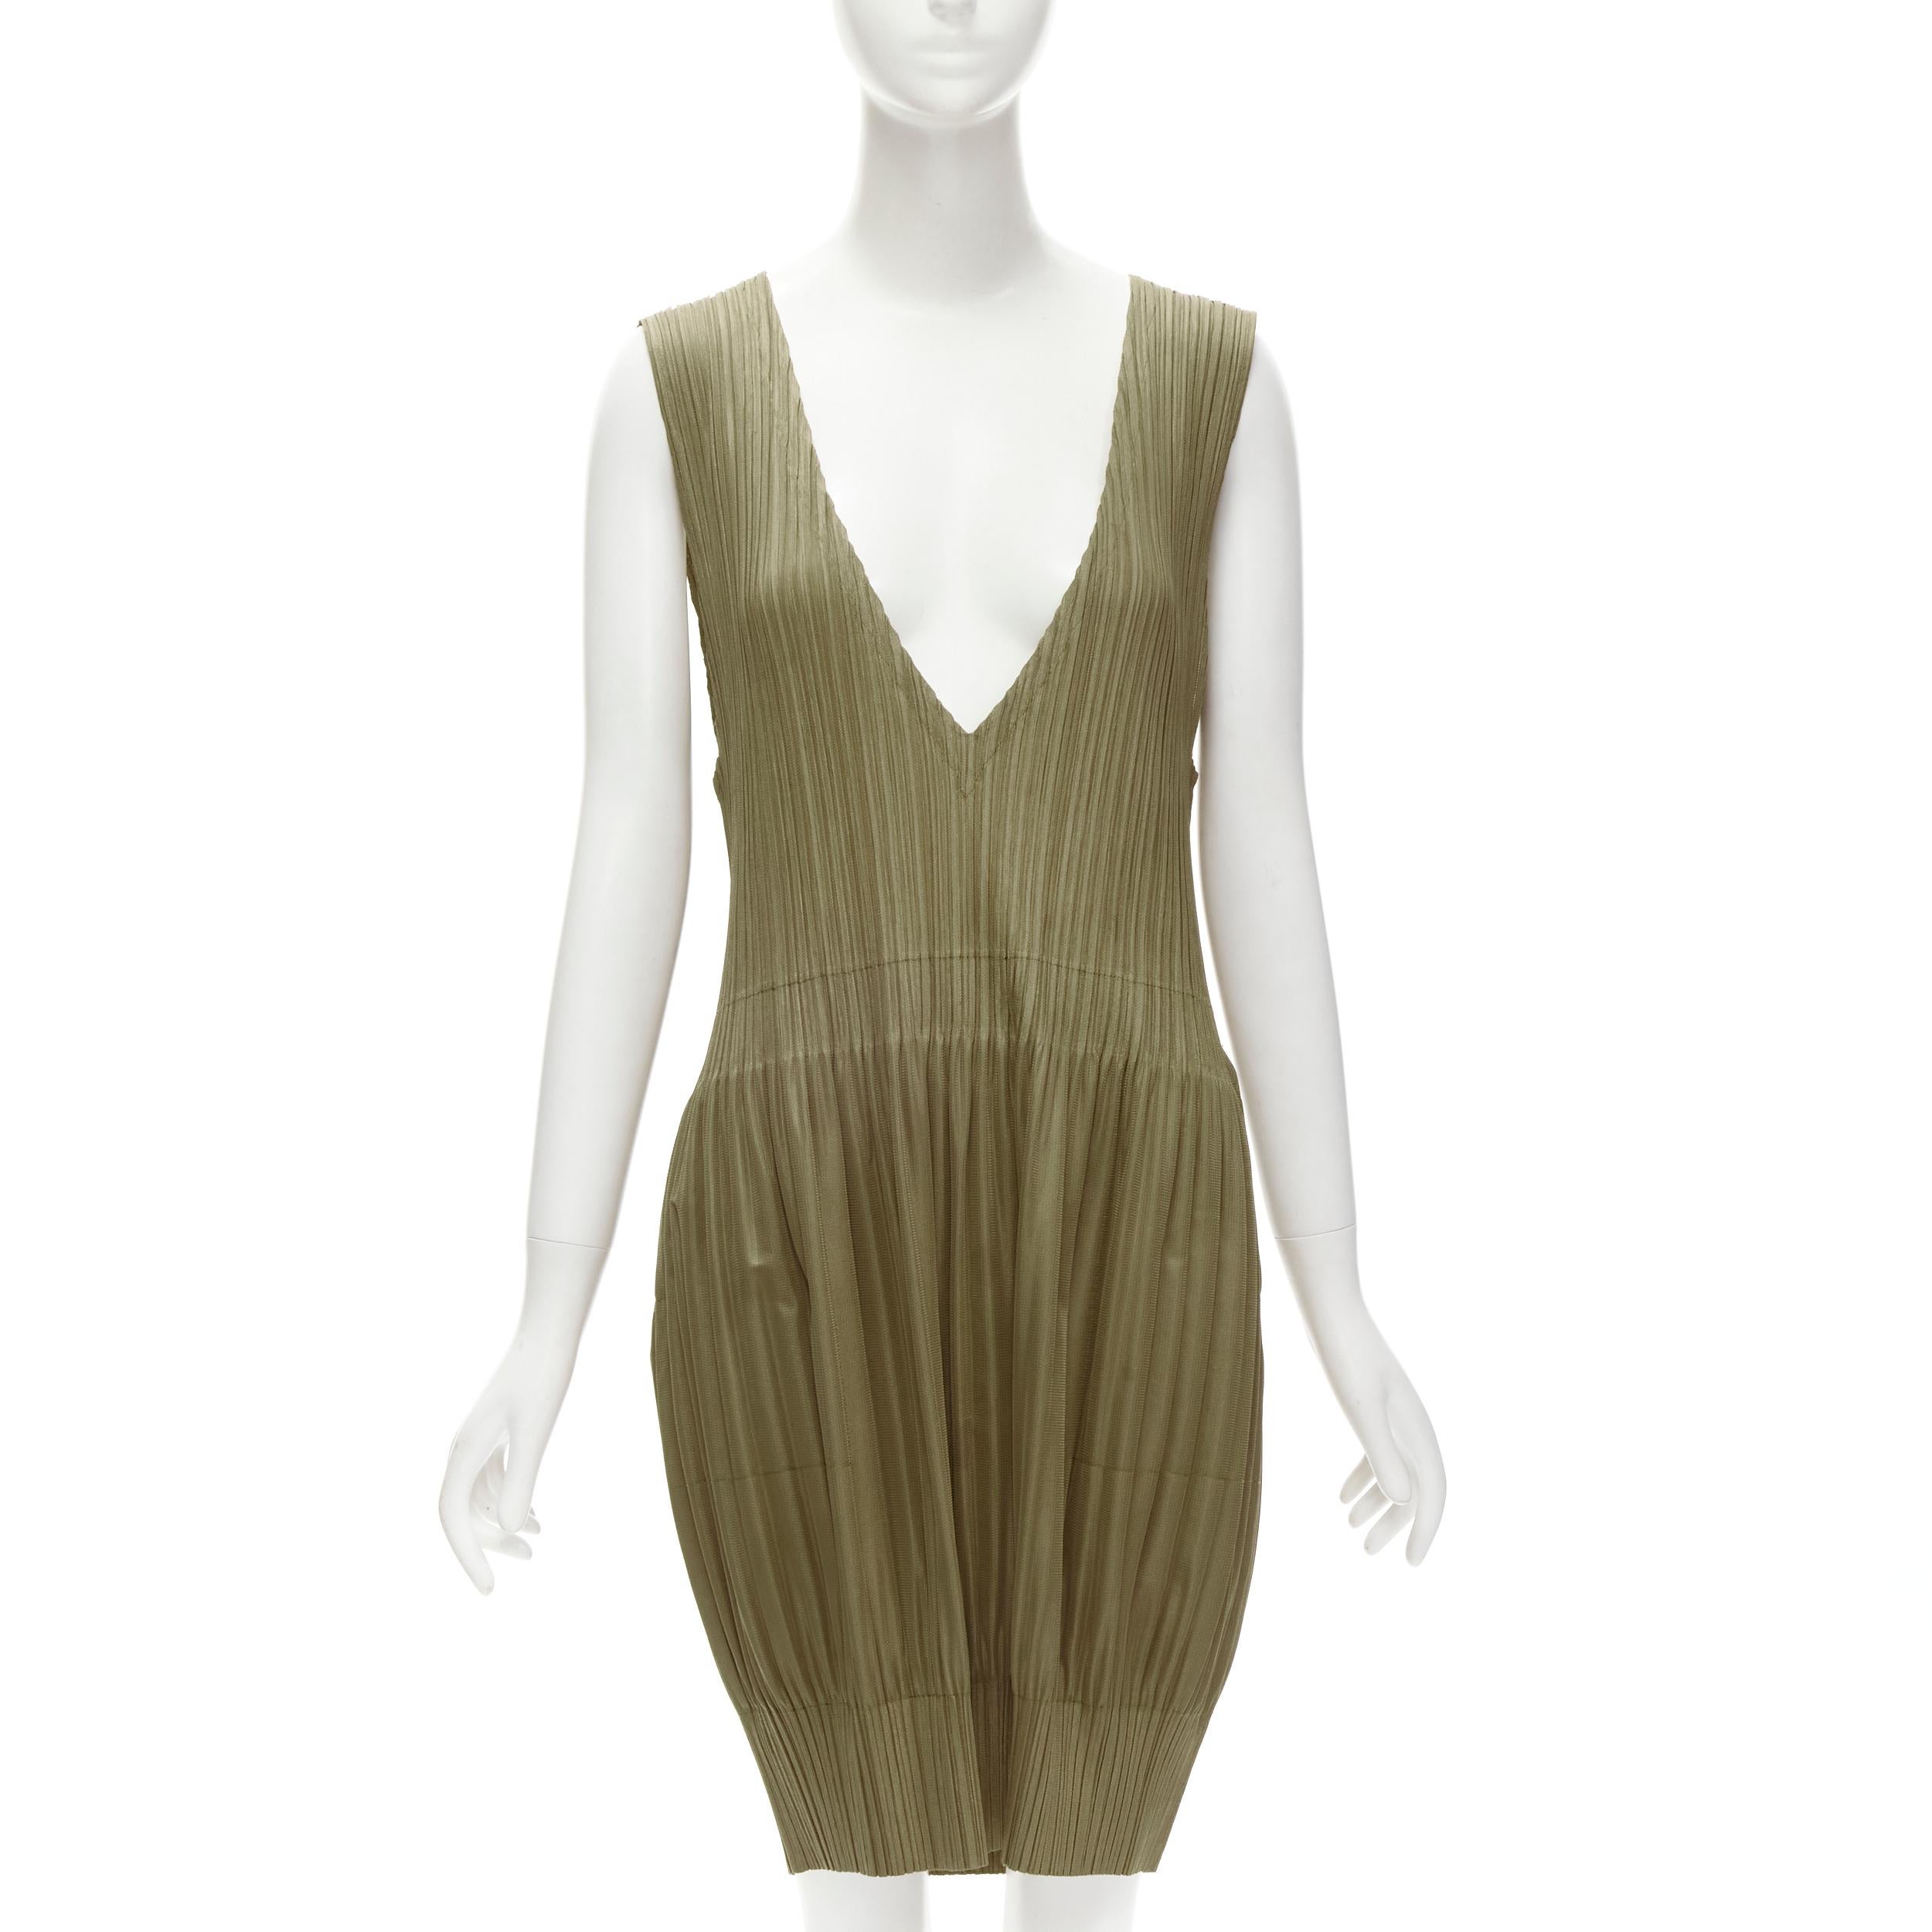 ISSEY MIYAKE PLEATS PLEASE gold V neck bubble skirt pleated plisse dress JP4 XL
Brand: Pleats Please Issey Miyake
Material: Polyester
Color: Gold
Pattern: Solid
Extra Detail: Can be worn back to front for different neckline. Dual side pockets.
Made